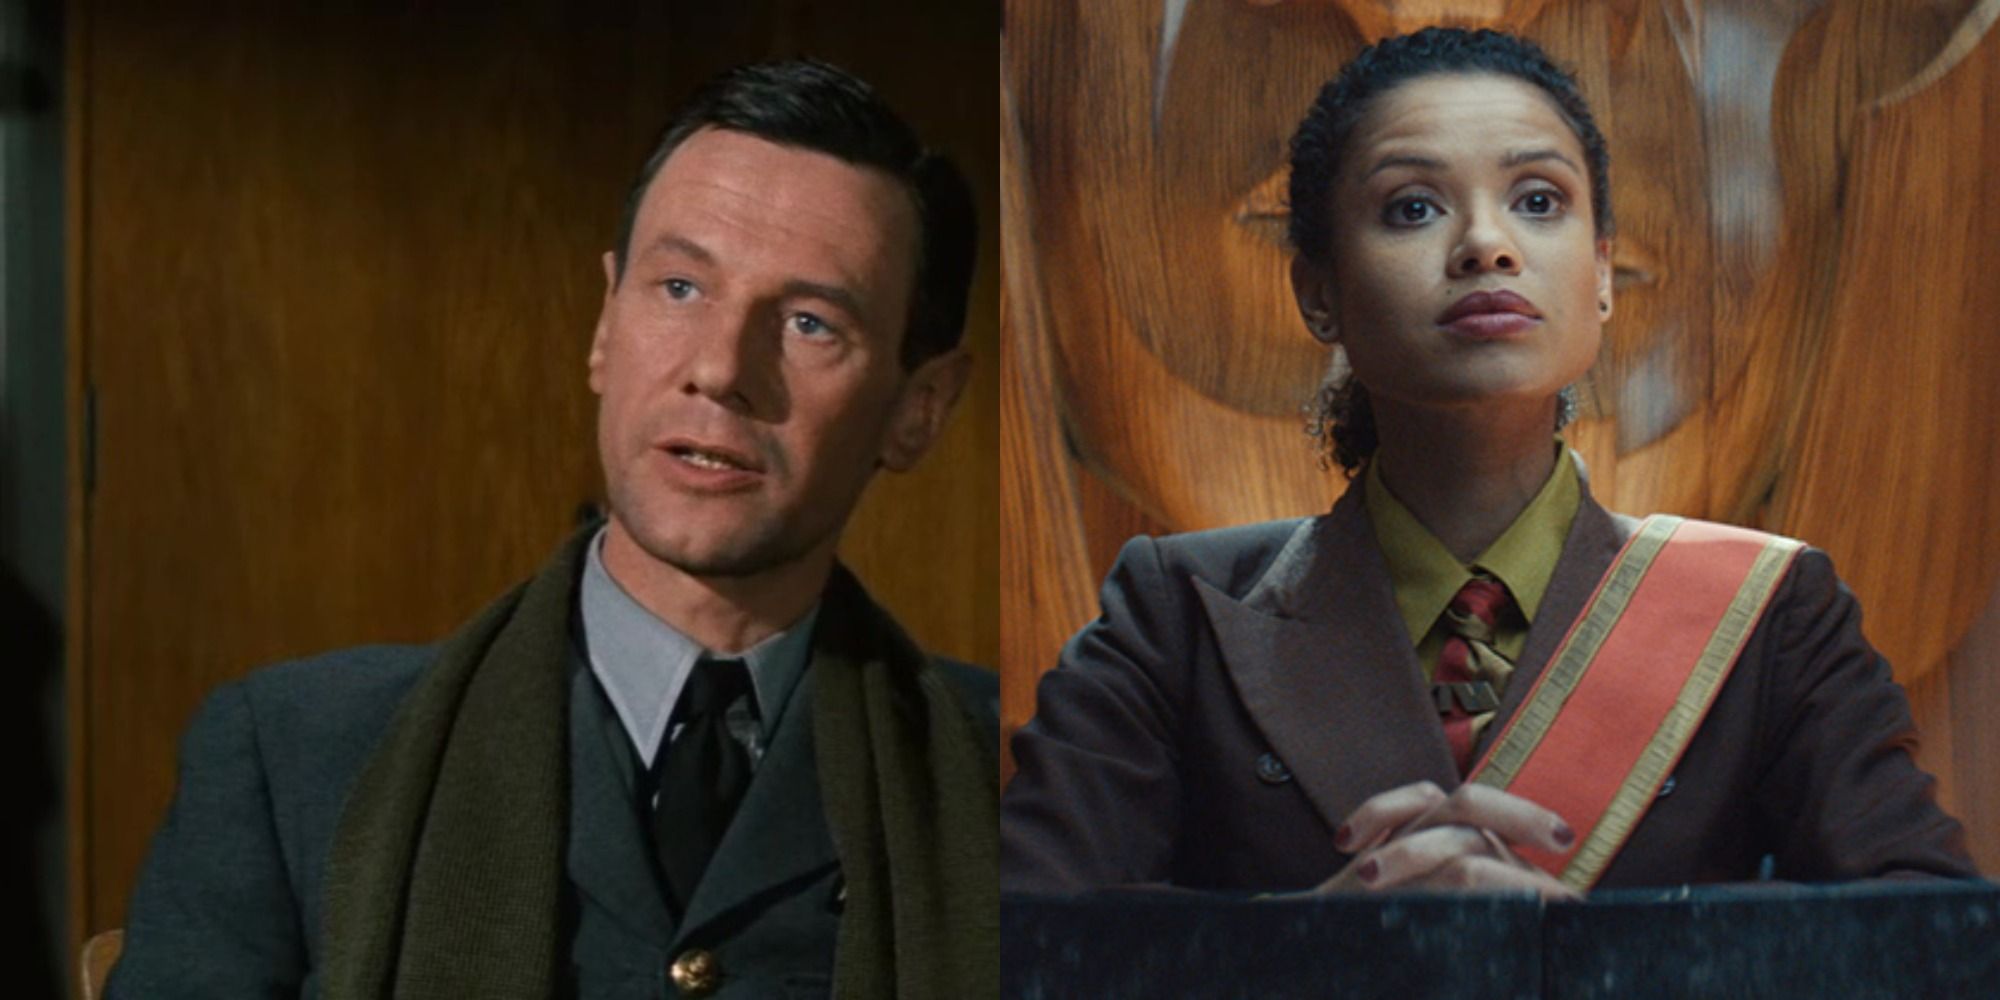 Split image of James Donald in The Great Escape and Gugu Mbatha-Raw in Loki